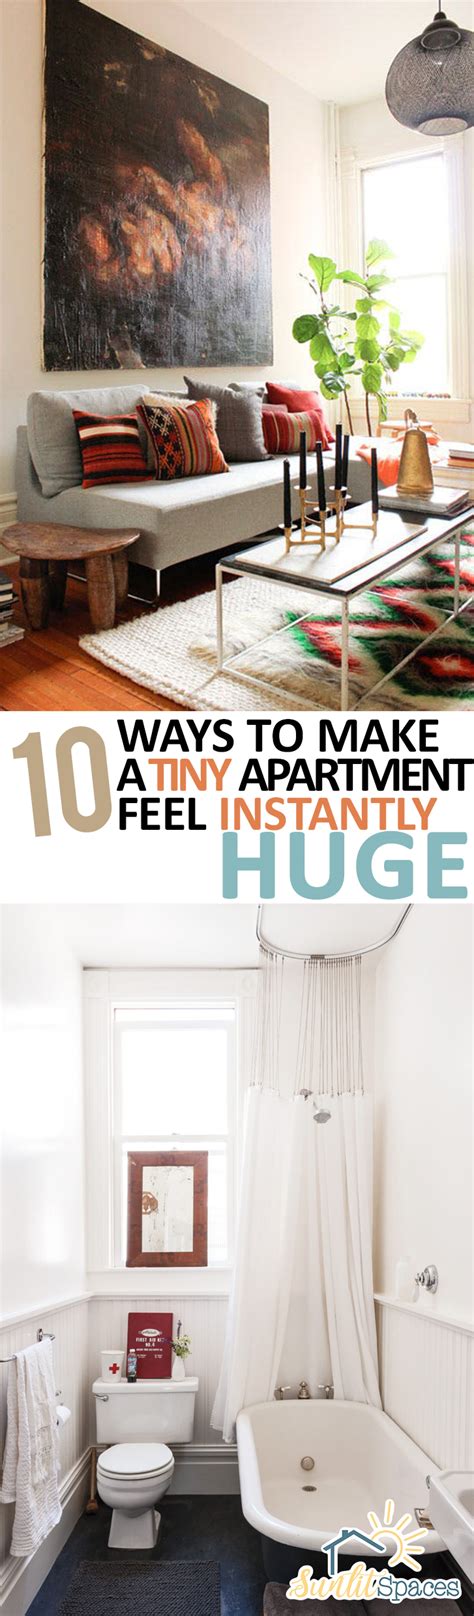 10 Ways To Make A Tiny Apartment Feel Instantly Huge